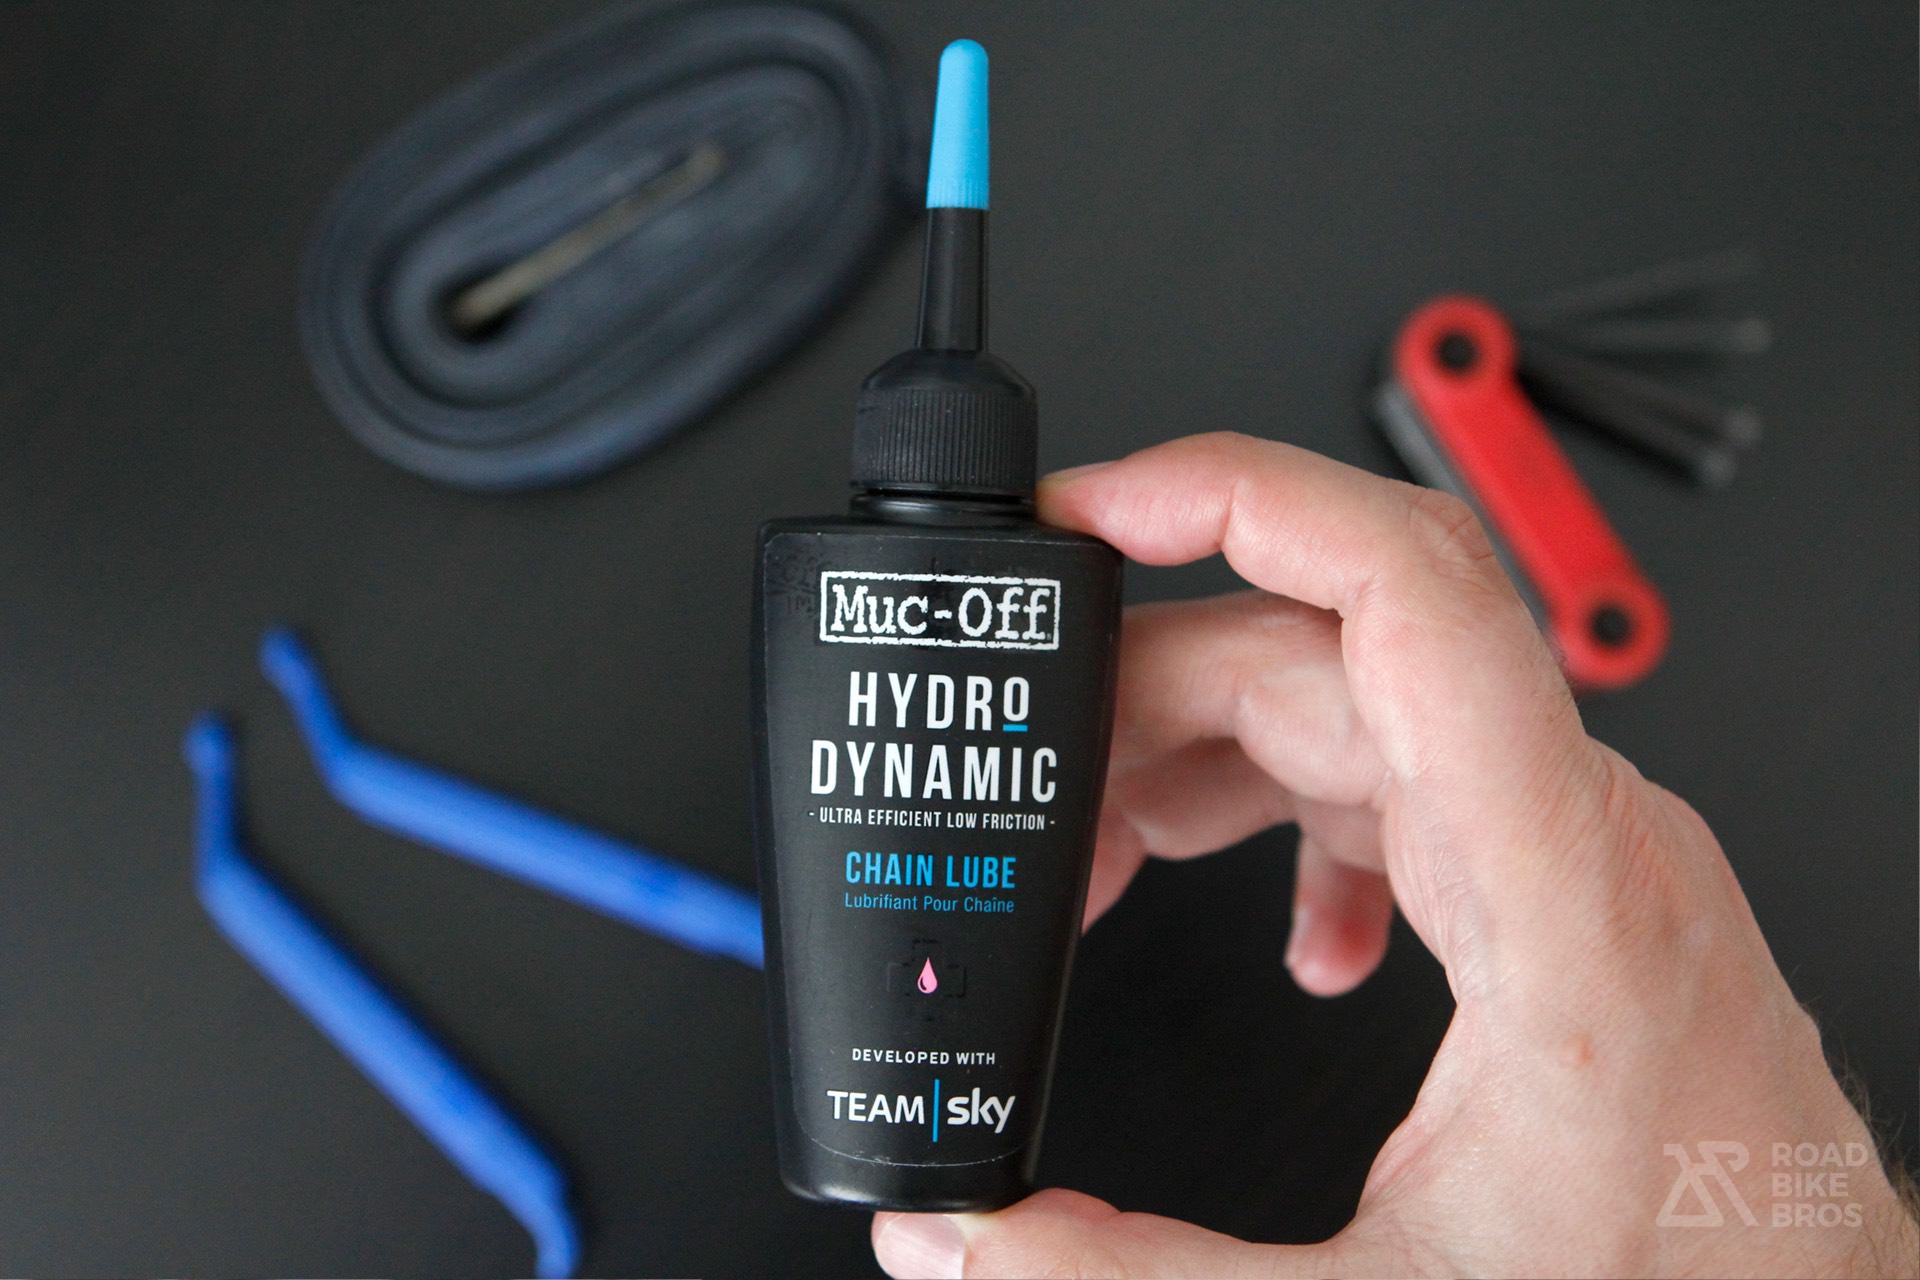 Muc-Off Team Sky Hydrodynamic Chain Lube Oil Review Package Design Tools